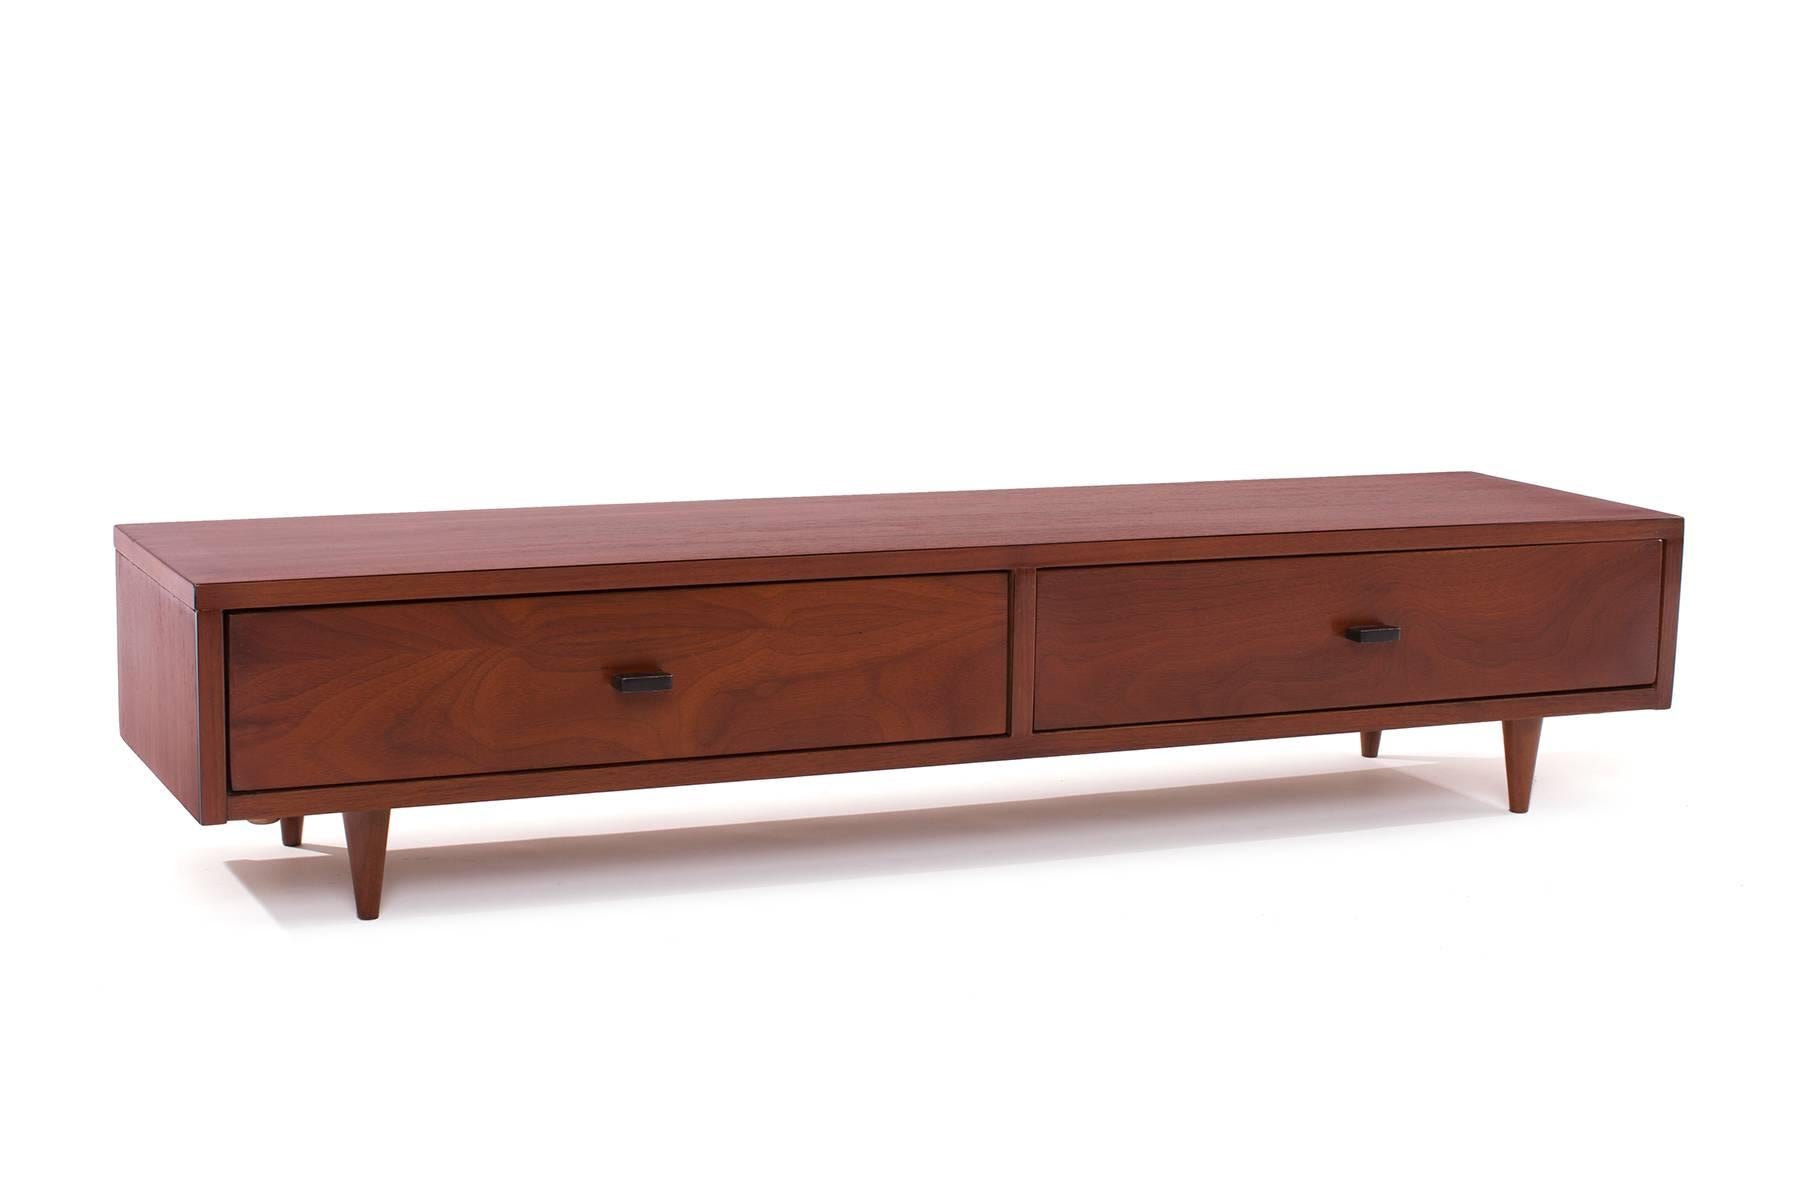 Walnut and metal jewelry chest, circa early 1950s. This example has beautifully grained walnut, two drawers with metal drawer pulls and tapered walnut legs.